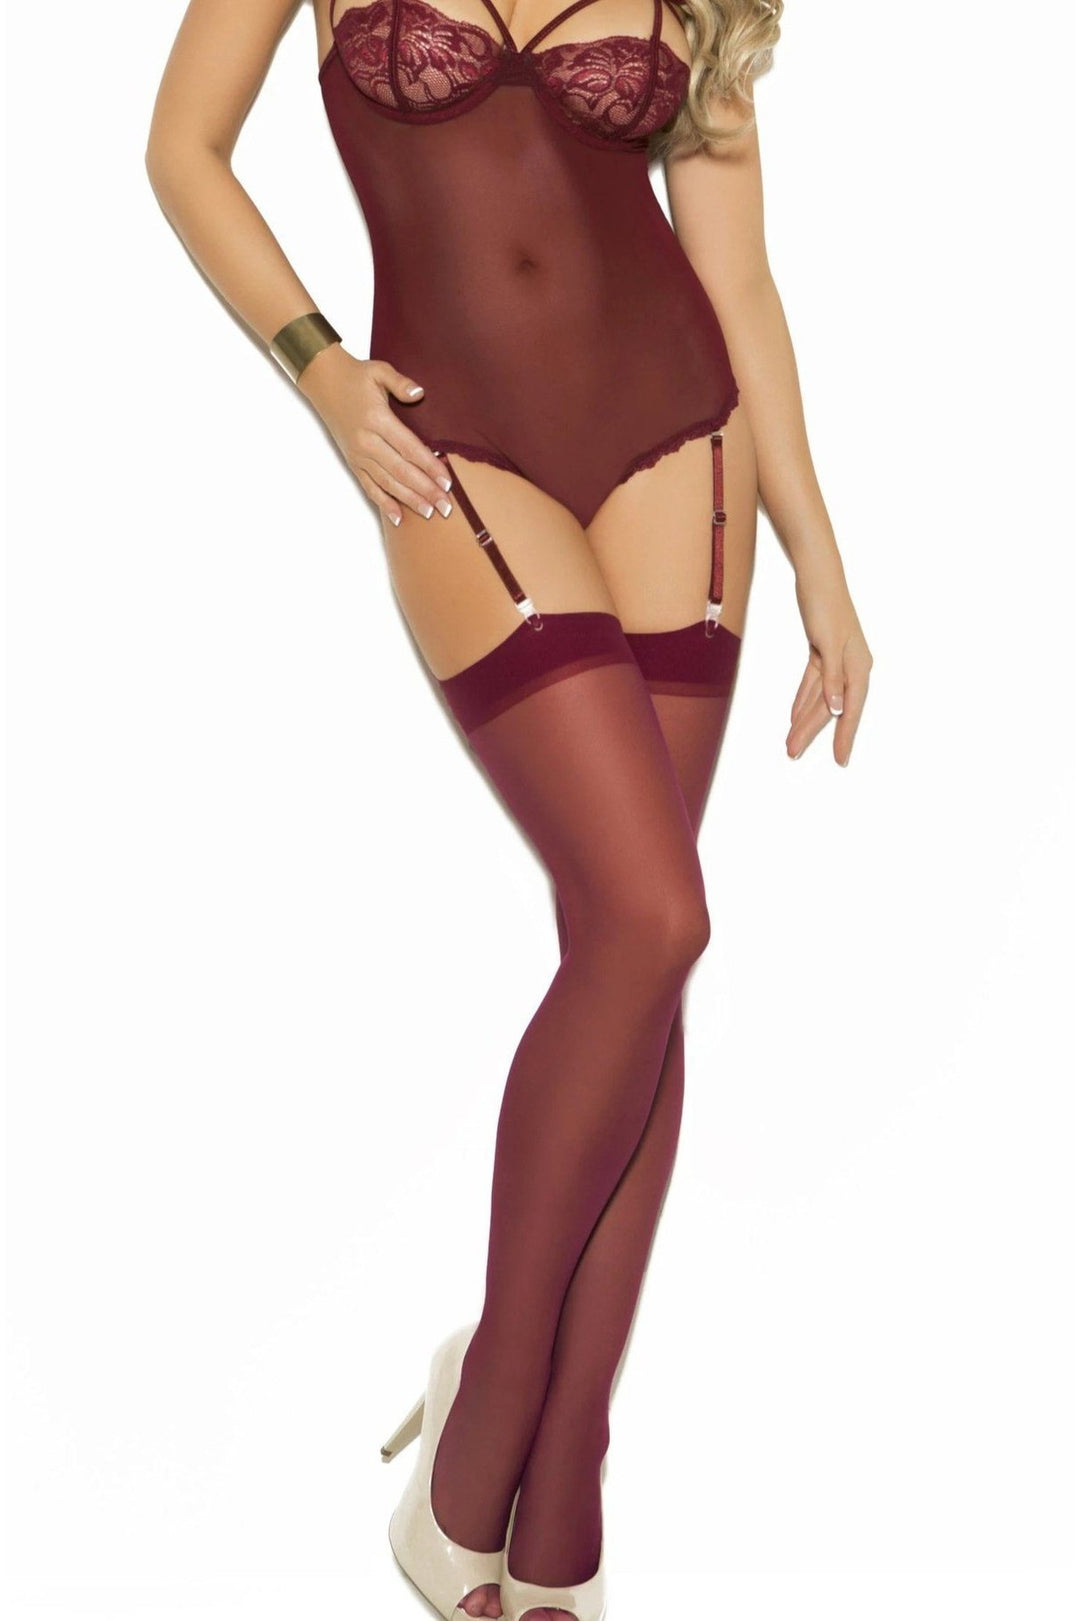 Plus Size Sheer Stockings-Thigh High Hosiery-Elegant Moments-Burgundy-SEXYSHOES.COM